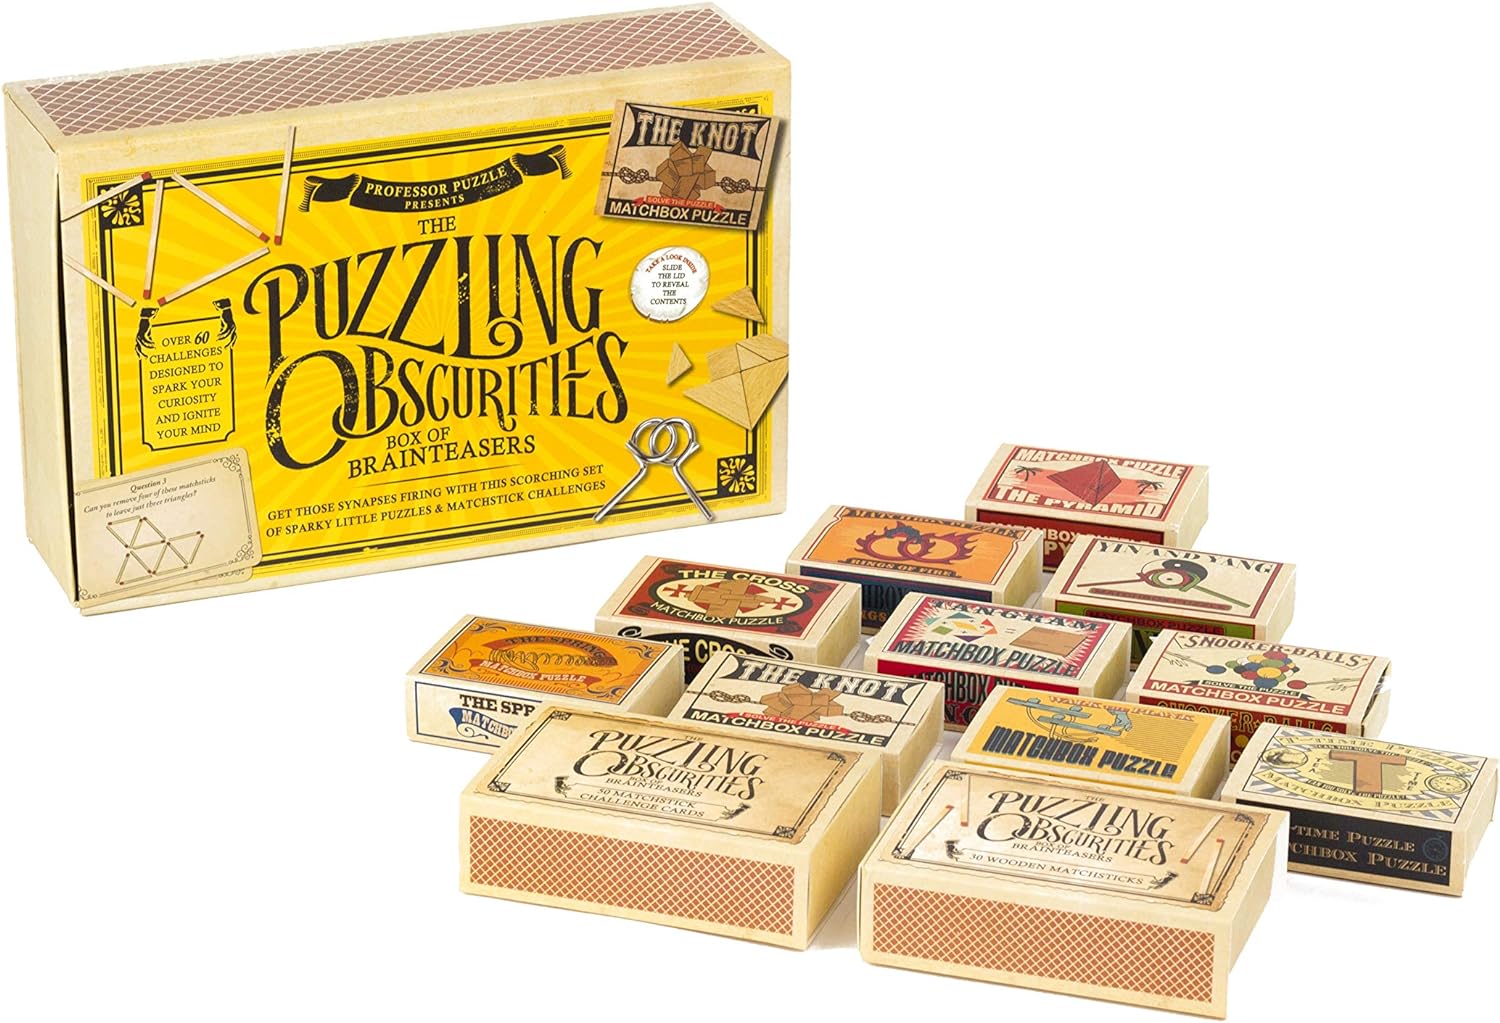 Puzzling Obscurities Box of Brainteasers